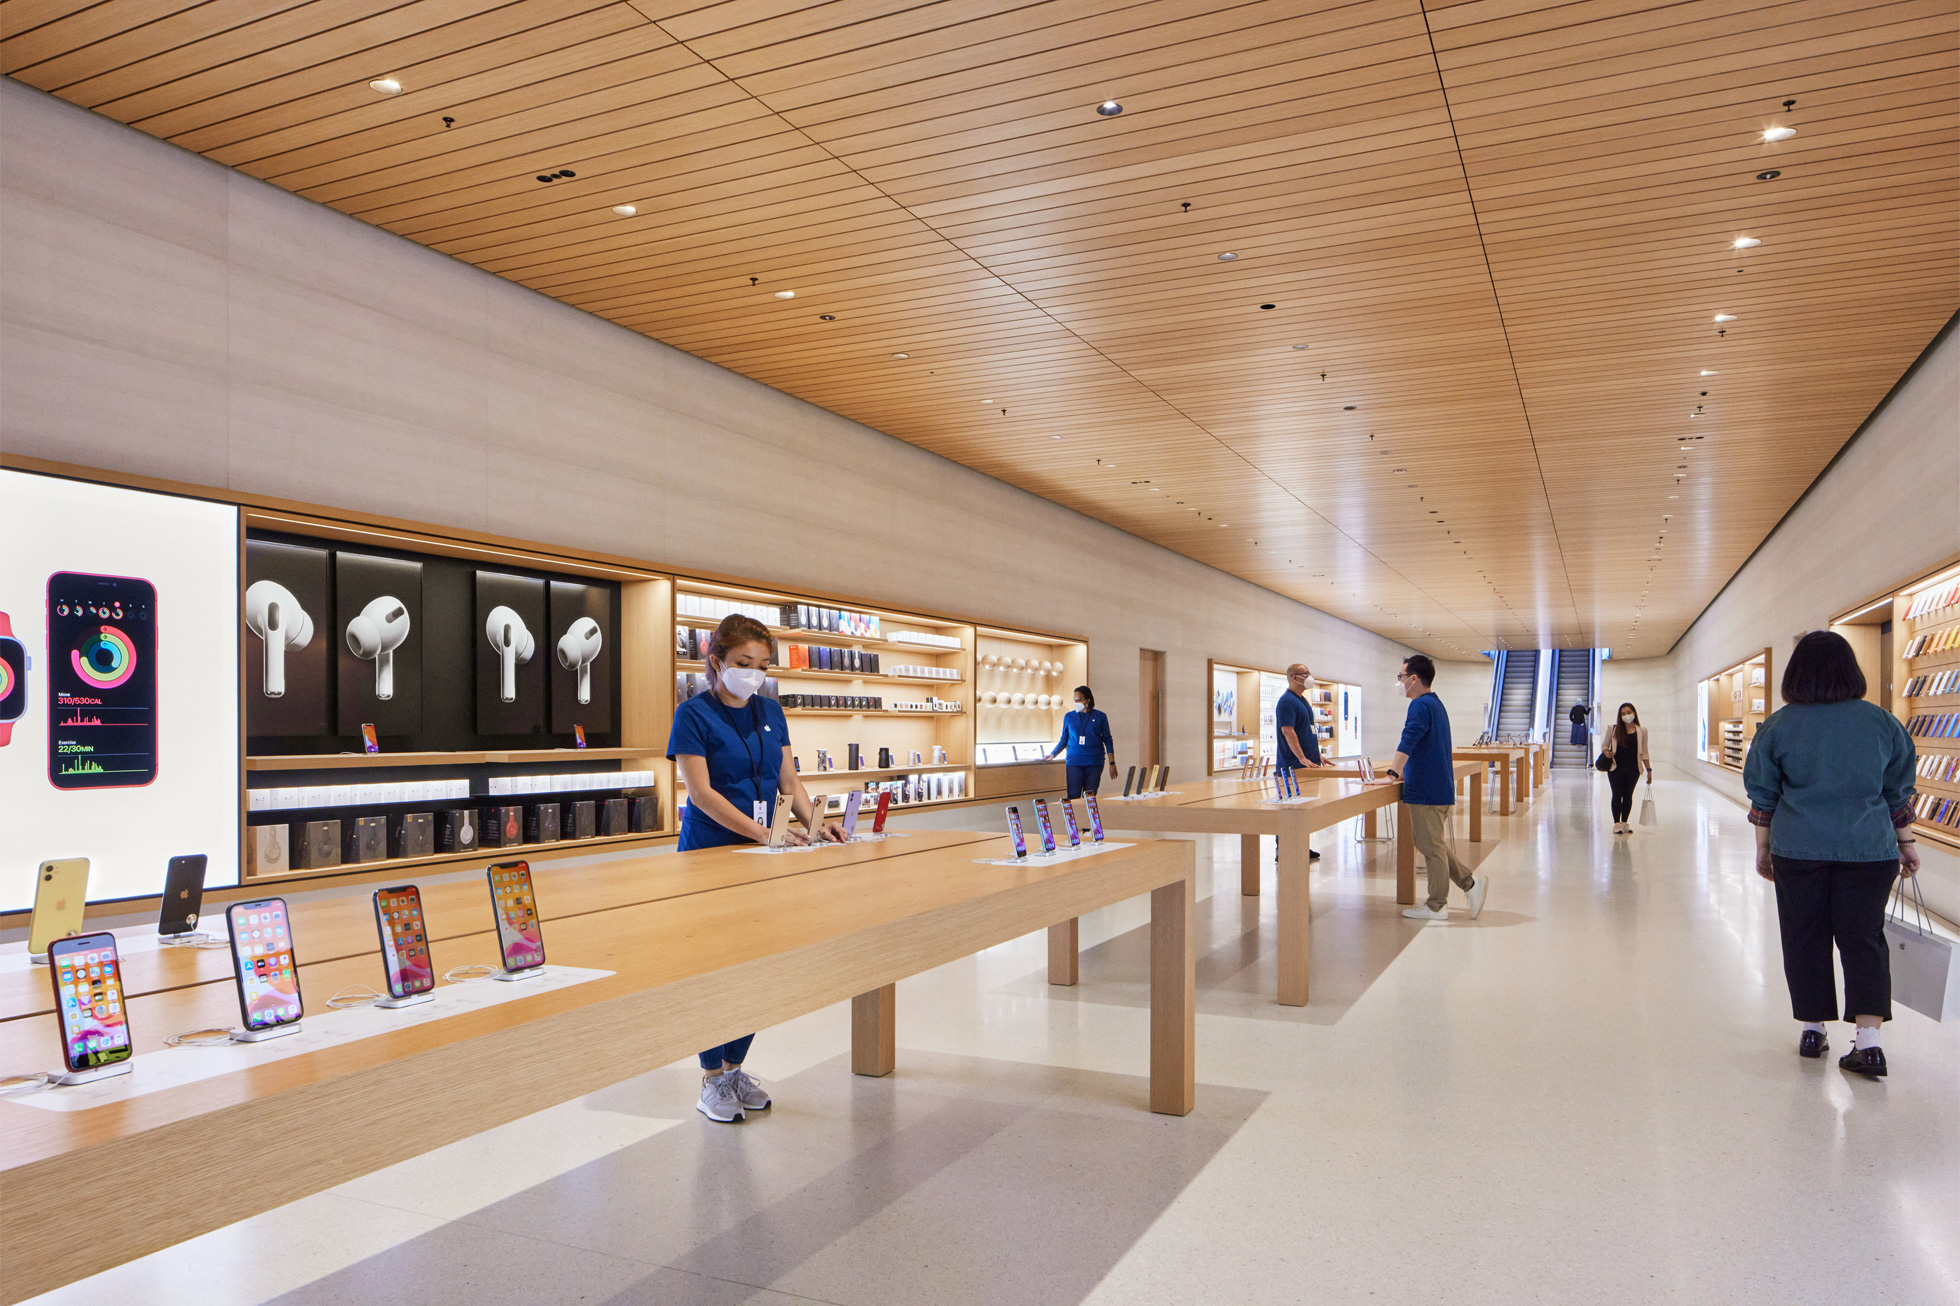 Apple Marina Bay Sands - Customers can explore curated Apple products and accessories or receive personal technical support from Geniuses.